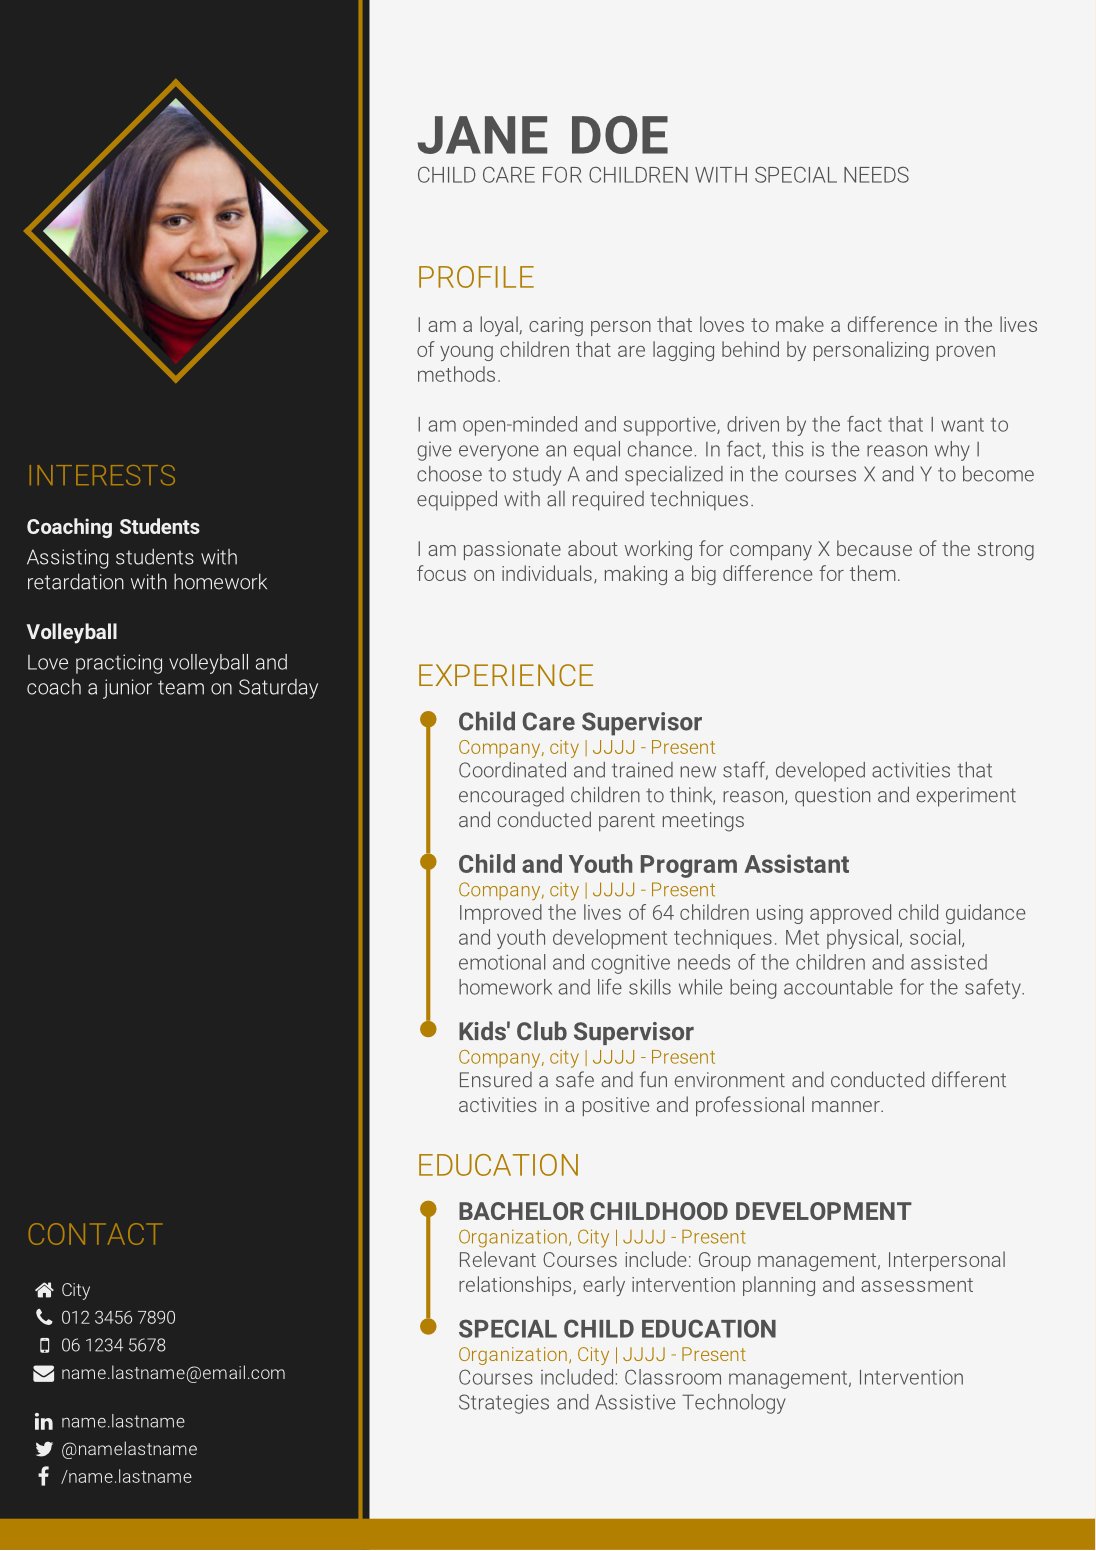 Personal-based CV template